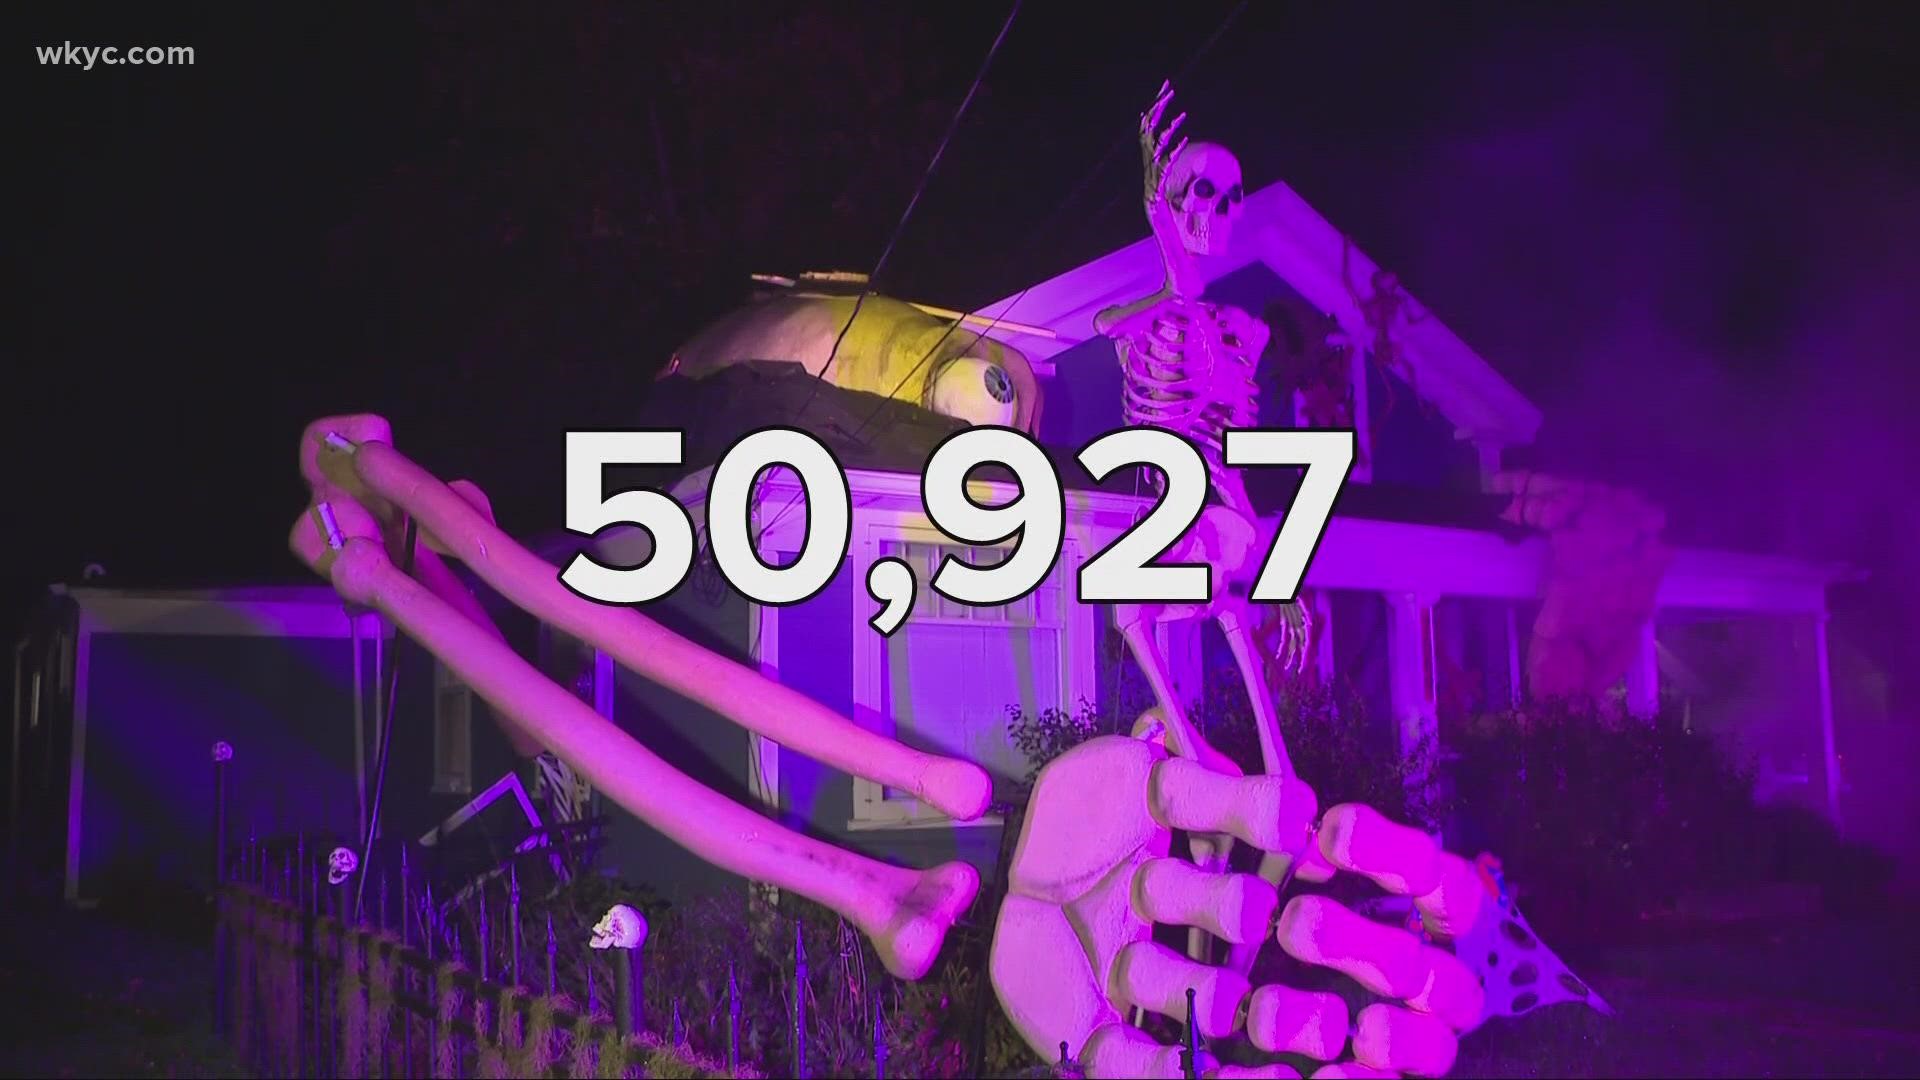 We're celebrating Halloween 2021 by the numbers in Cleveland.